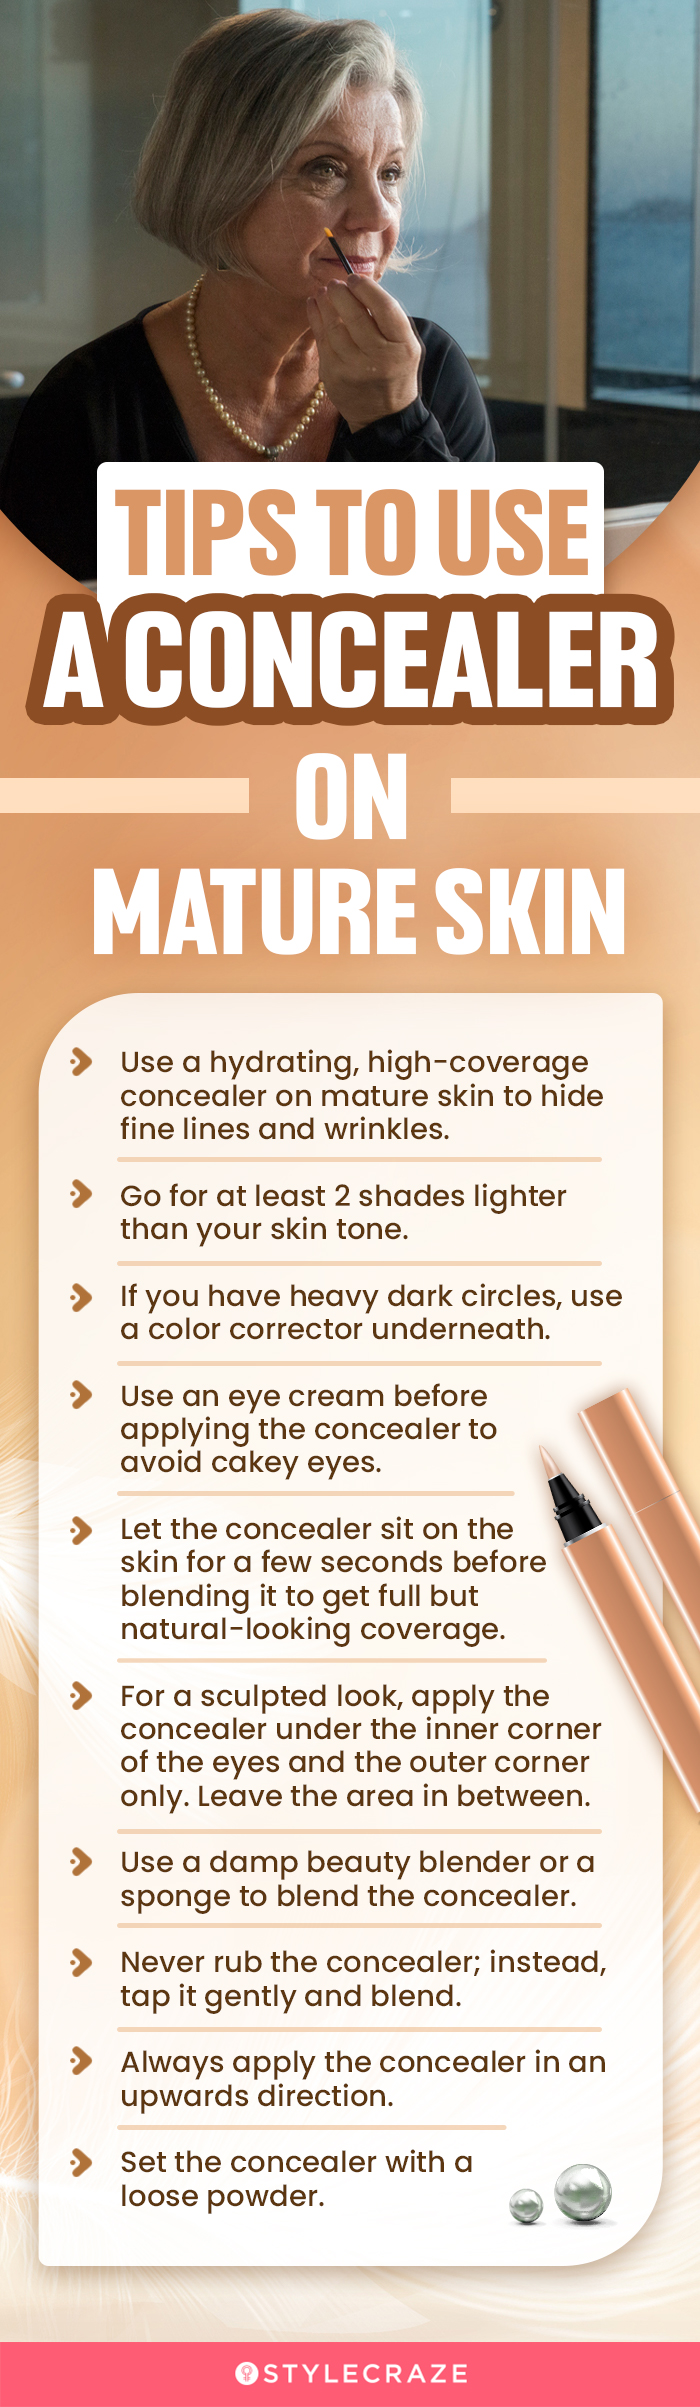 Tips To Use Concealer On Mature Skin (infographic)